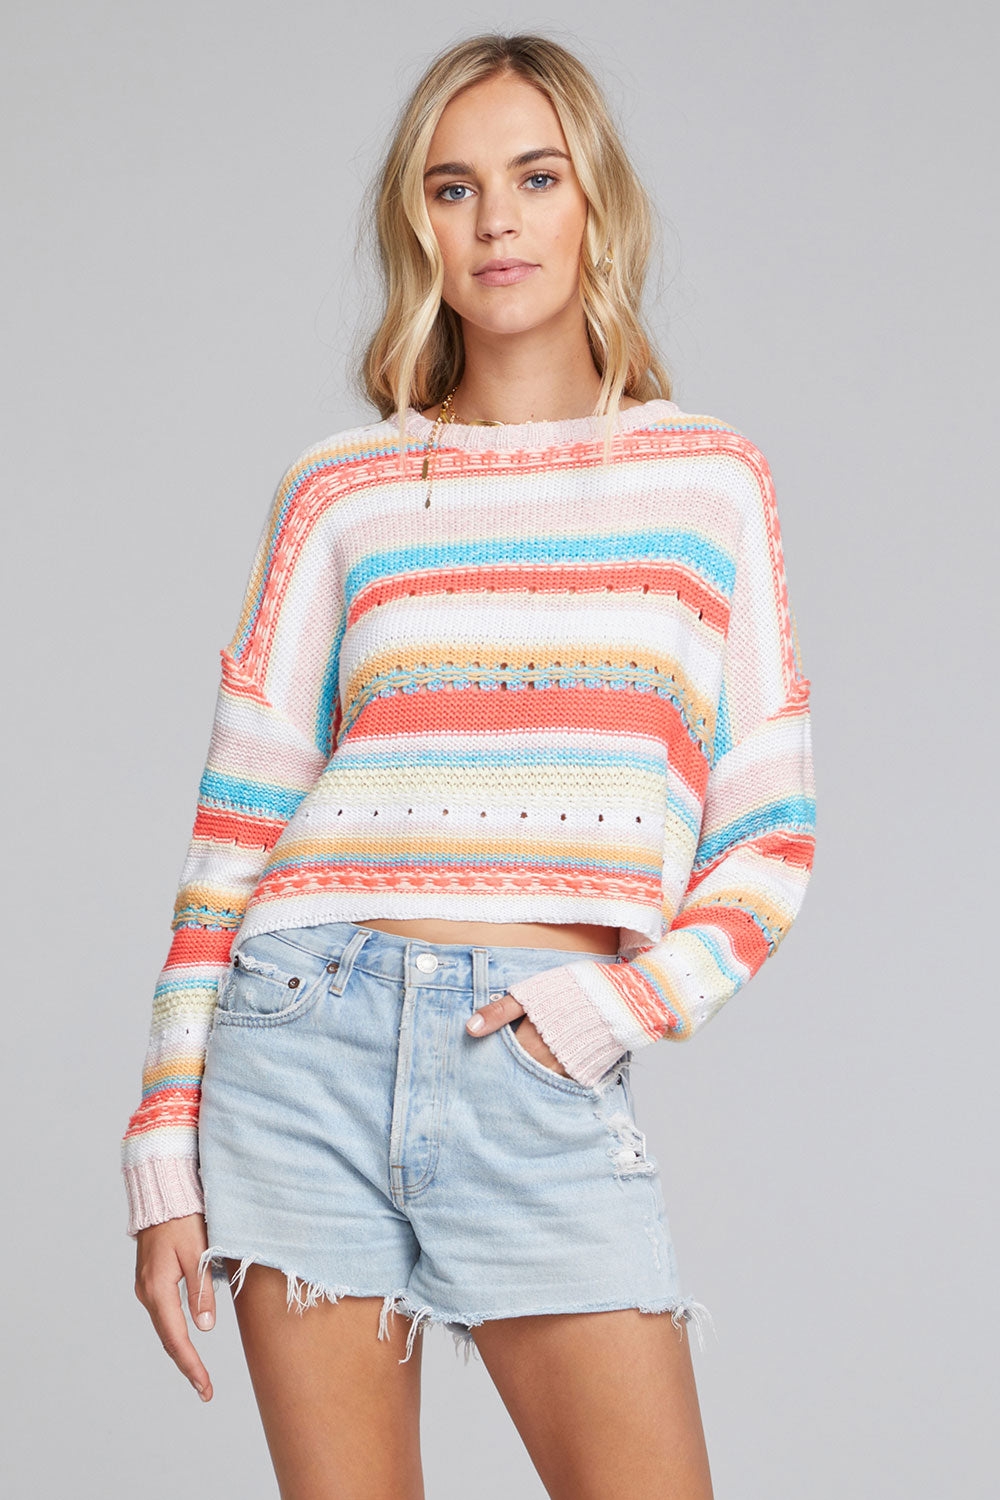 Saltwater Luxe - Charmed Sweater - Council Studio